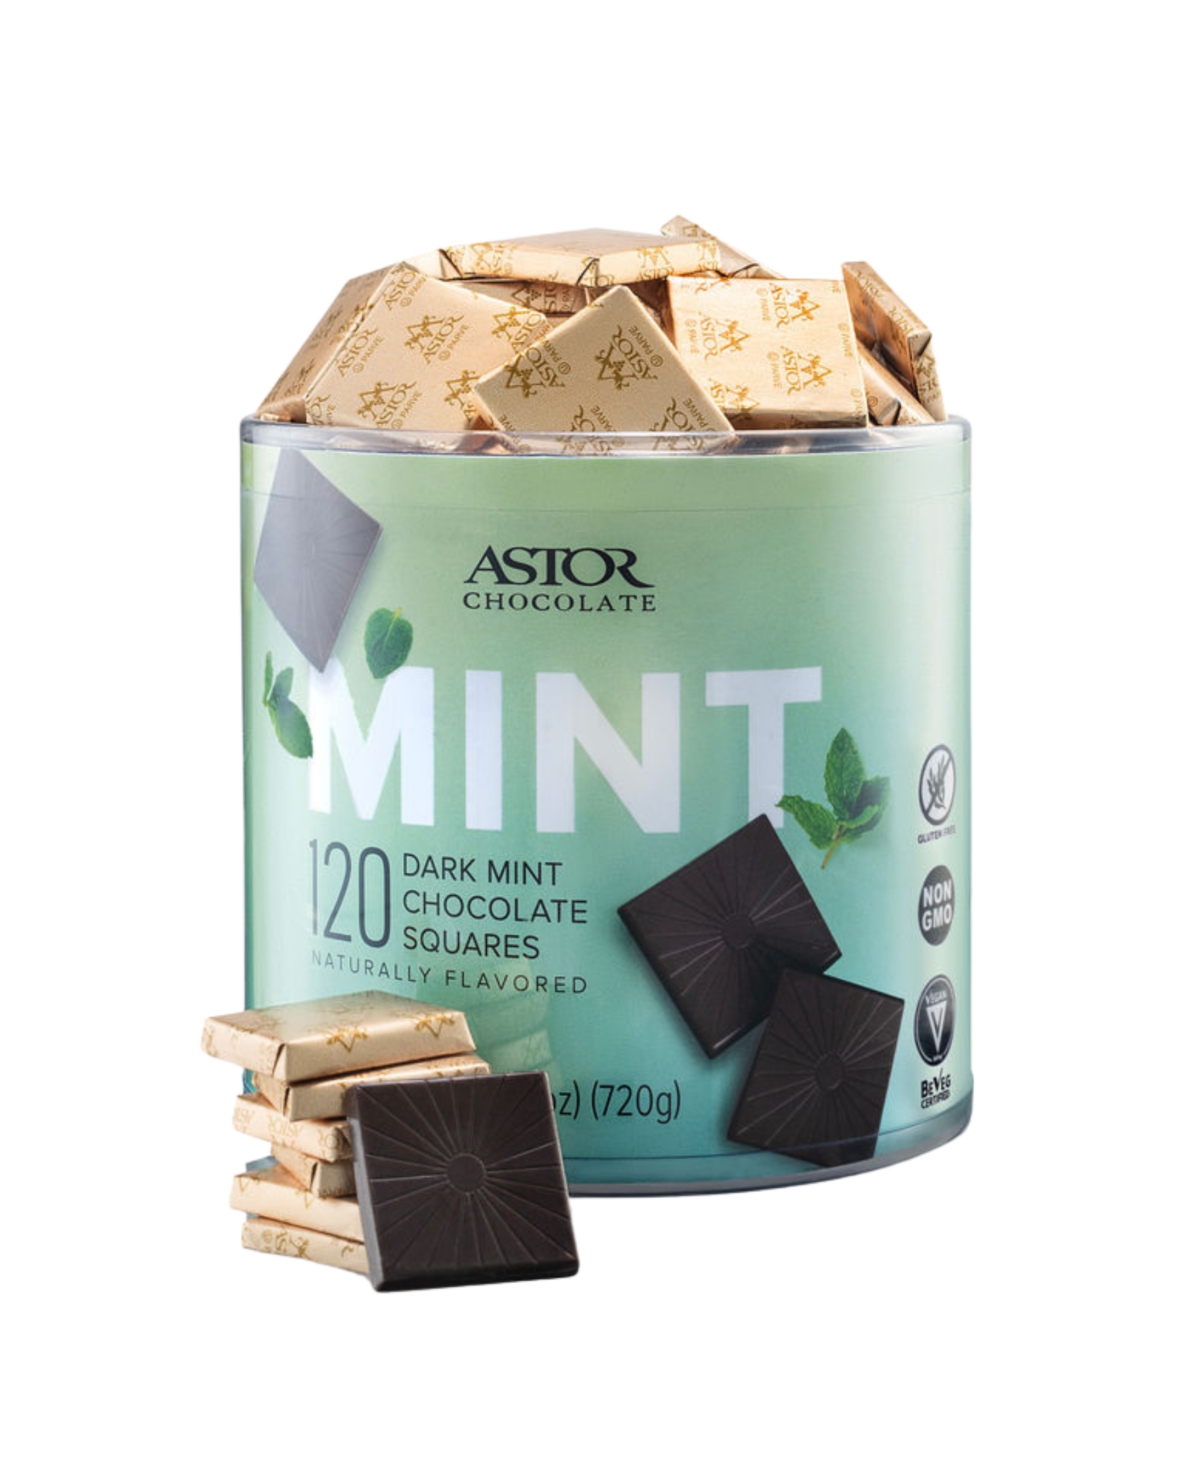 Astor Chocolate Petite Dark Mint Chocolate Squares Tub, 120 Pieces In No Color